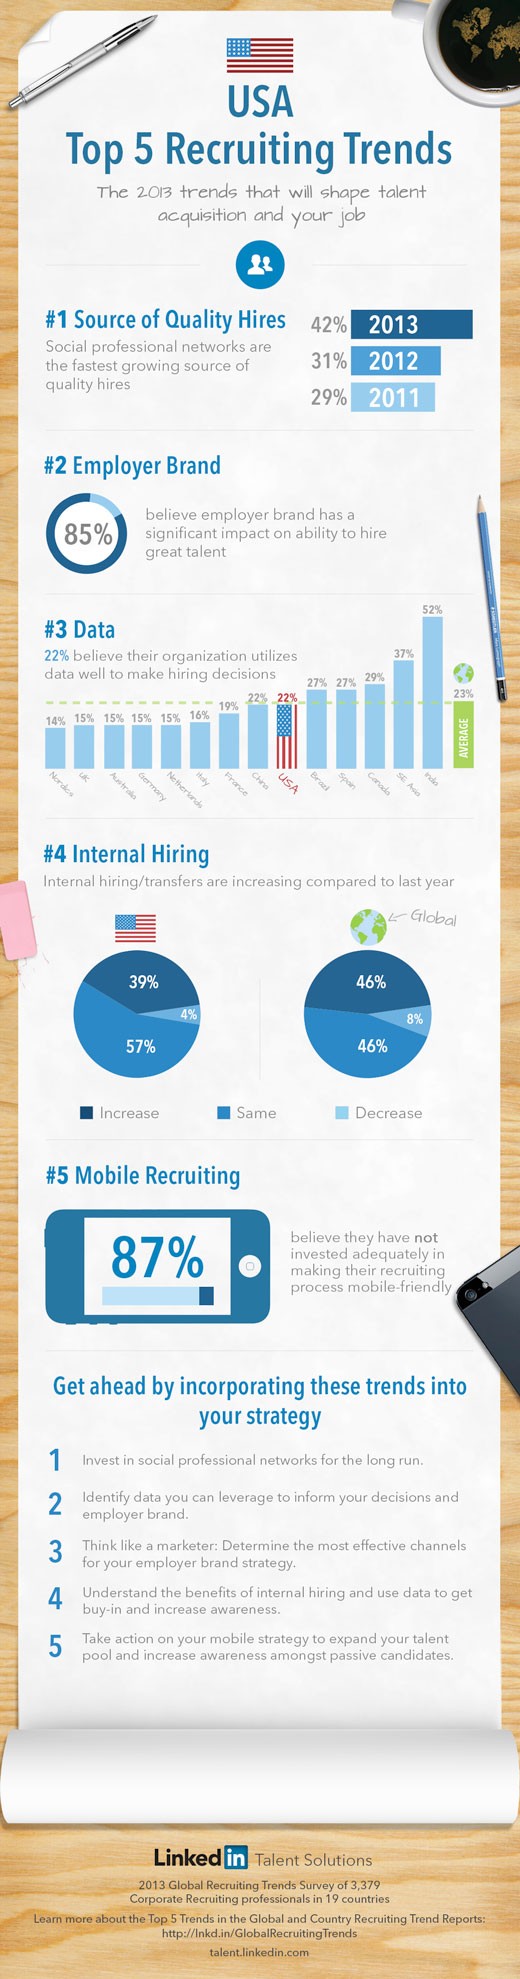 top-recruiting-trends-usa-